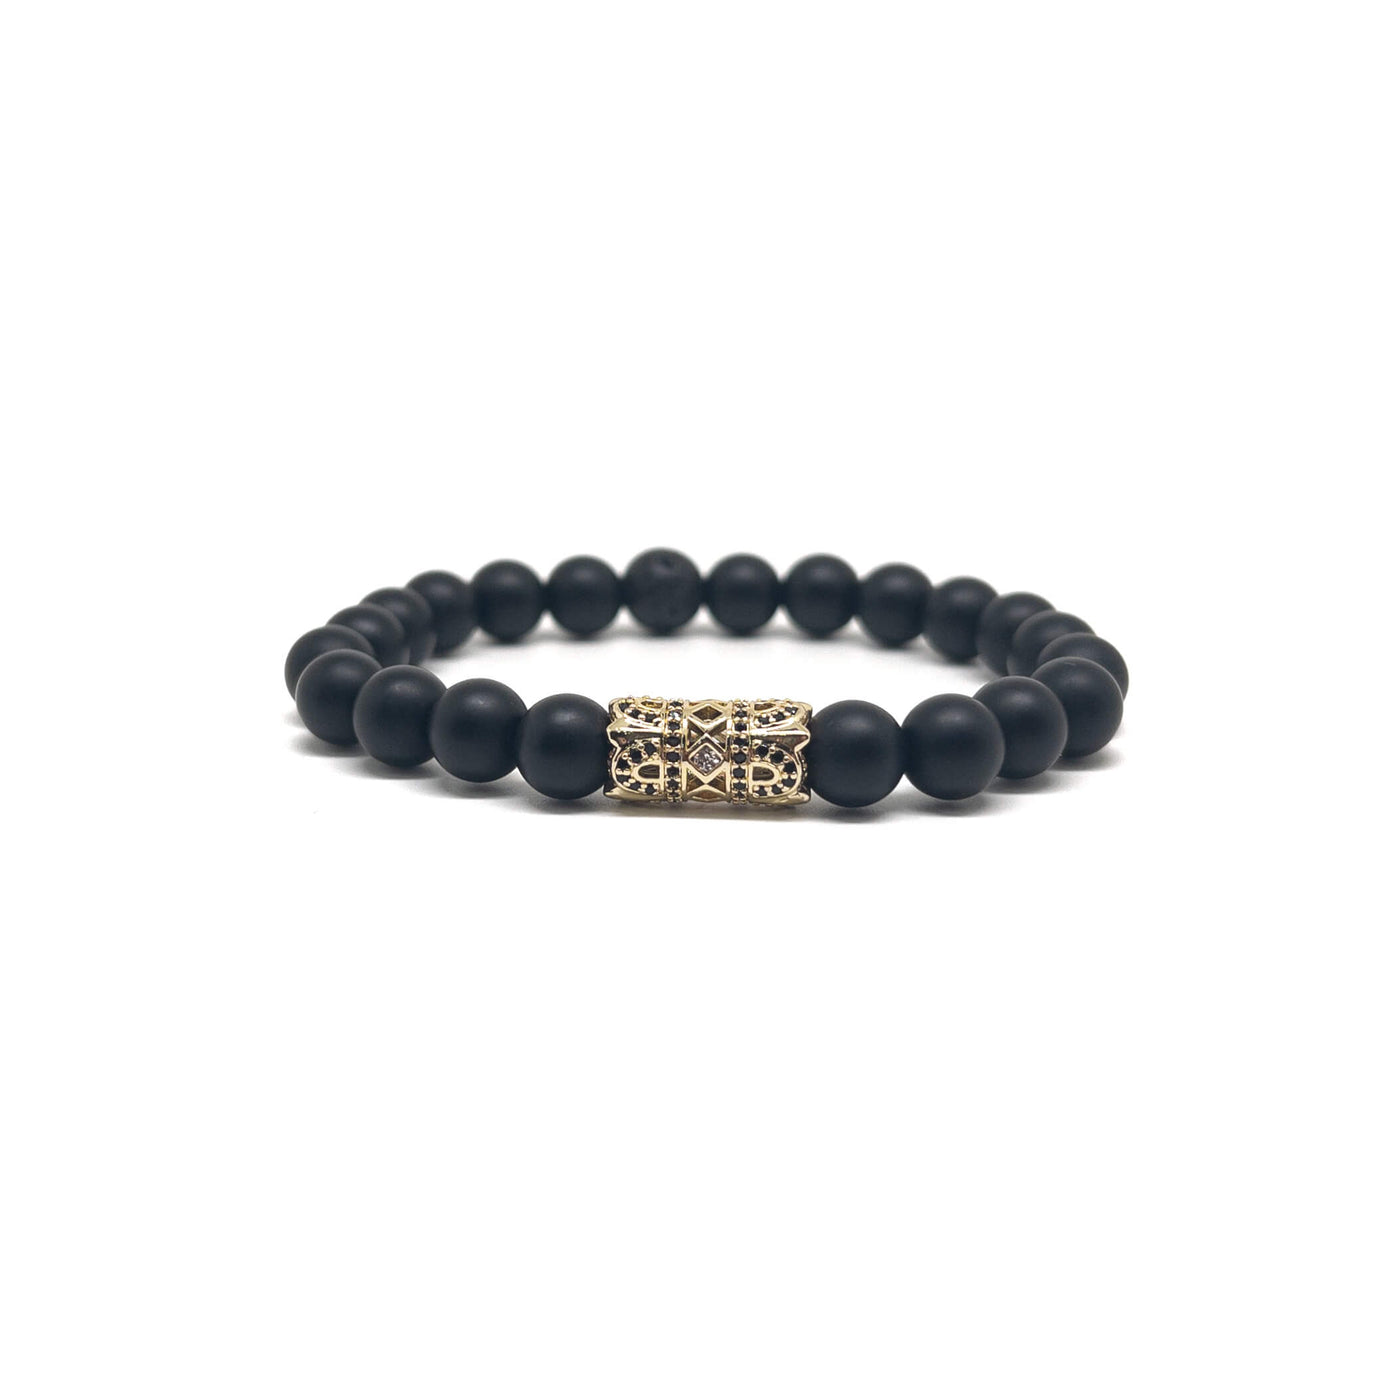 The Gold Plated Hollow and Onyx Stones bracelet